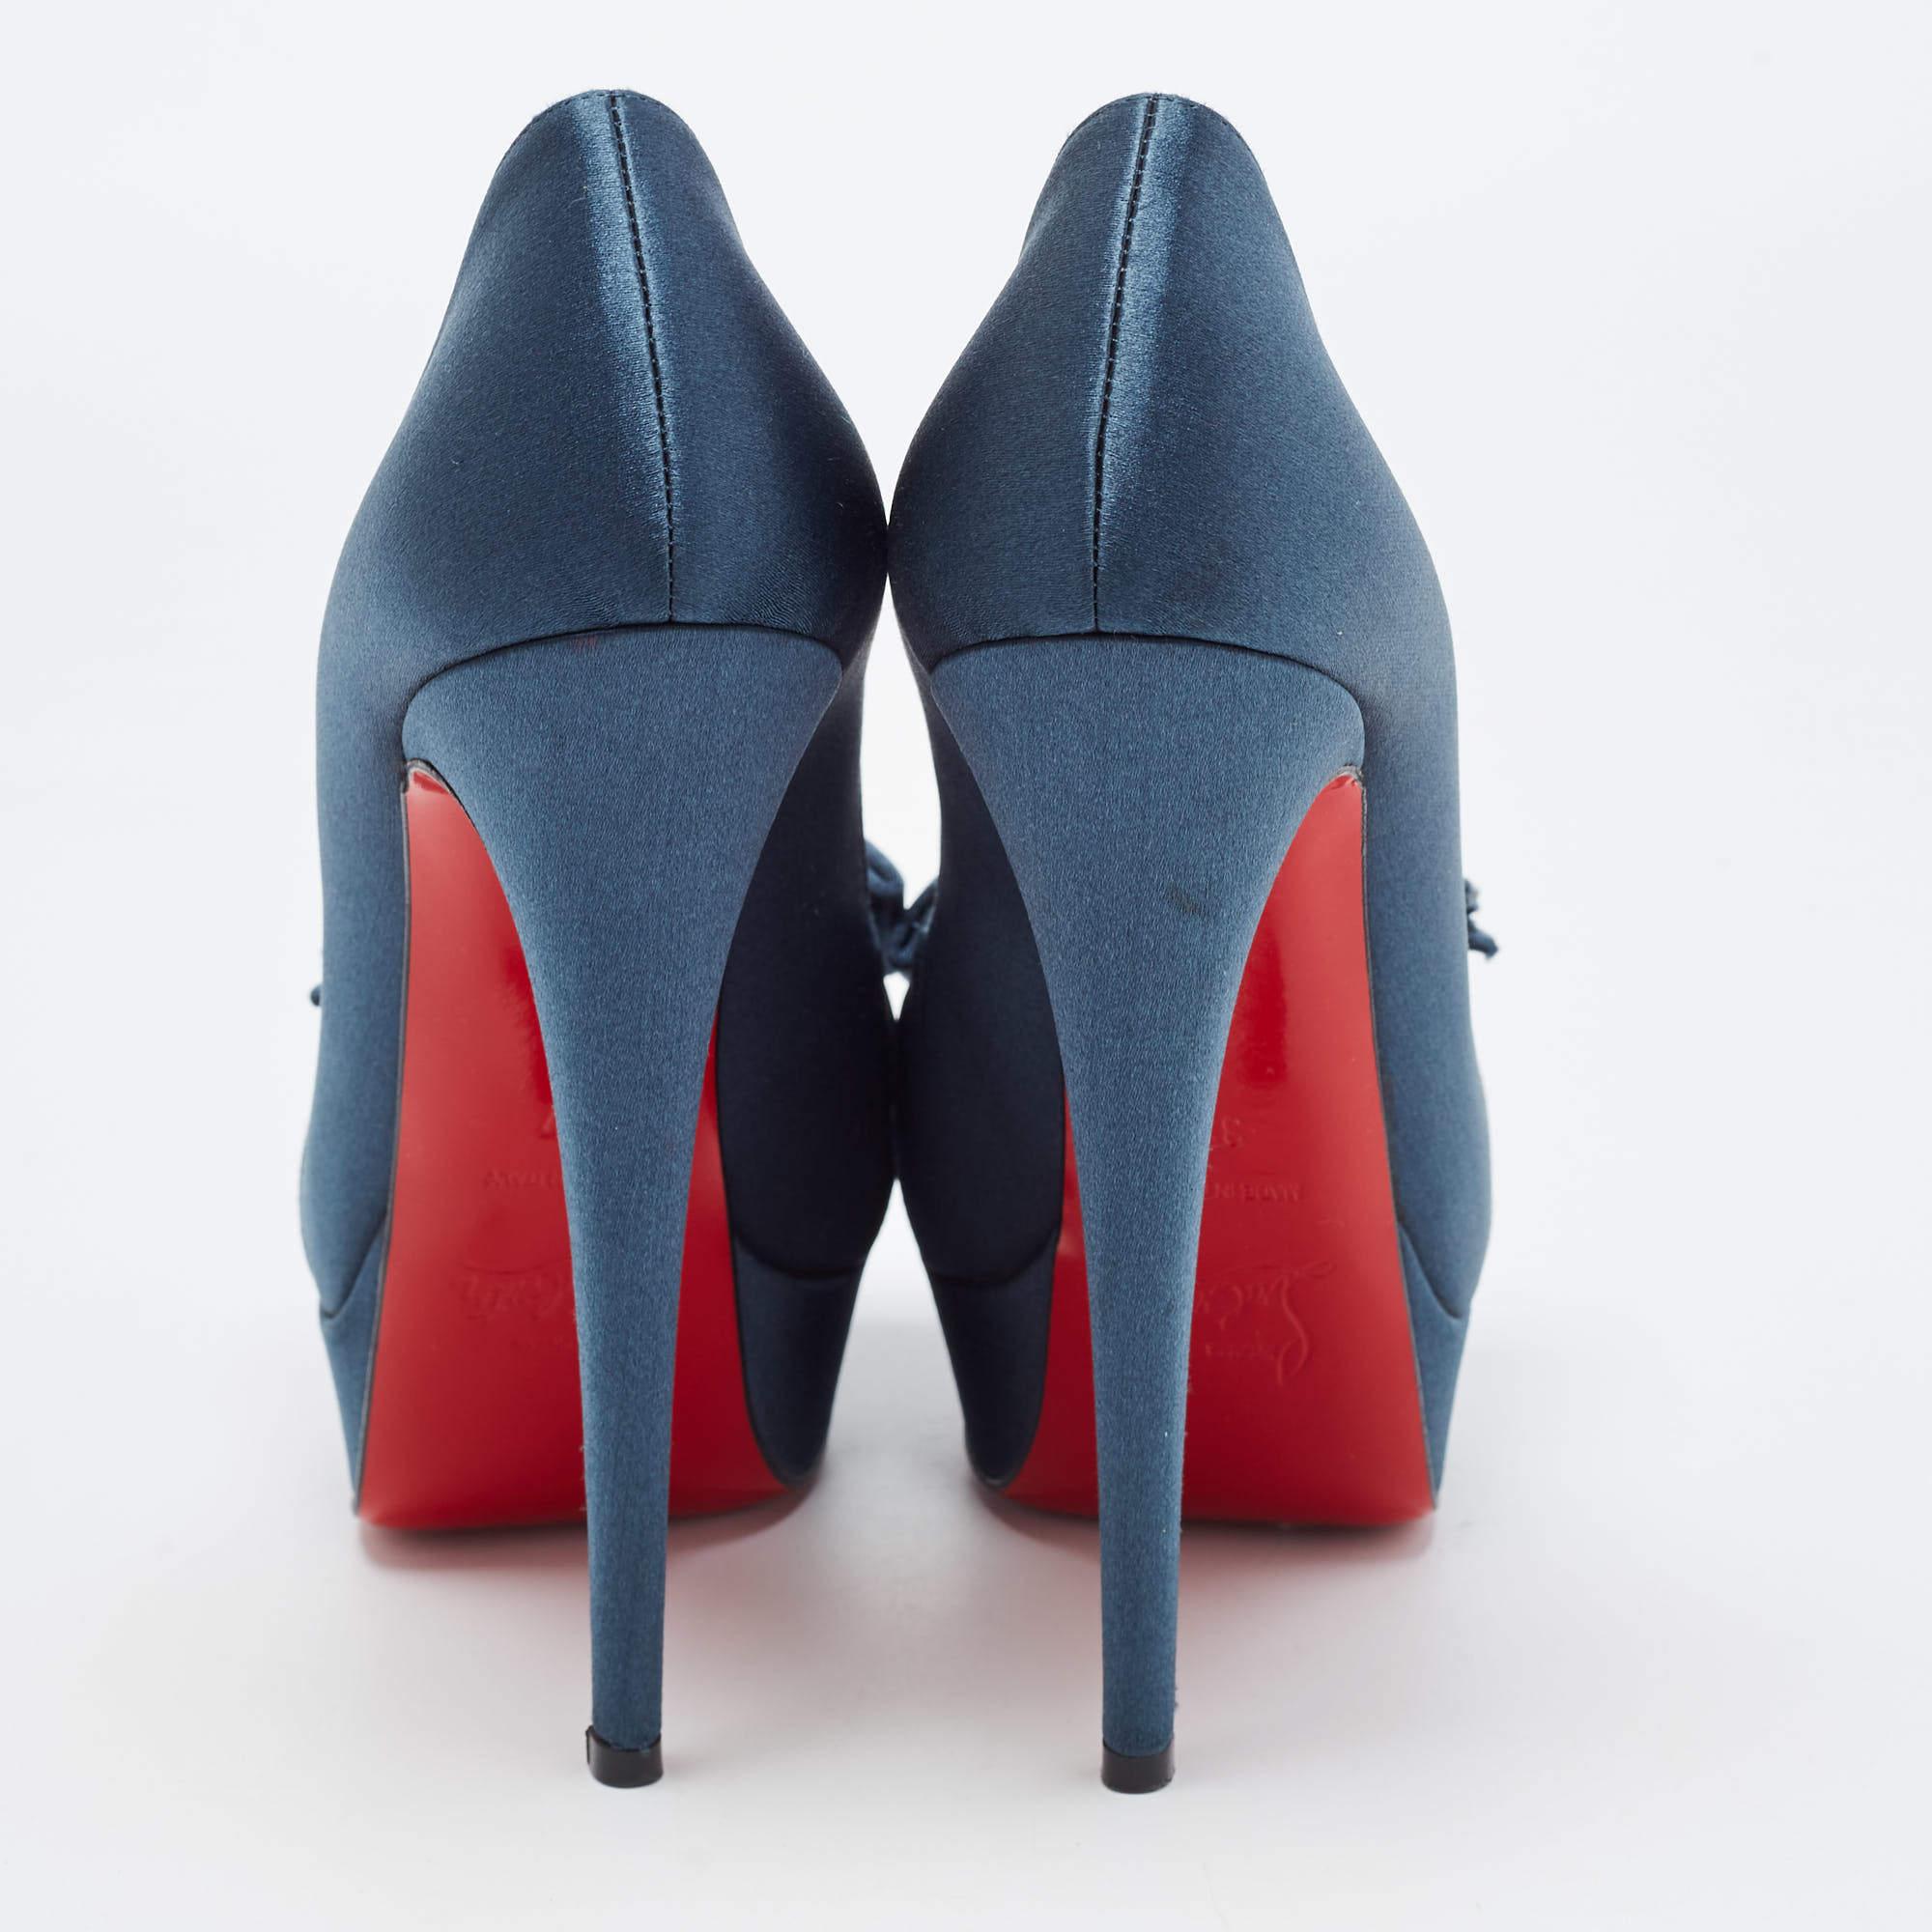 Purple Christian Louboutin Teal Satin Madame Butterfly Pumps Size 37 For Sale